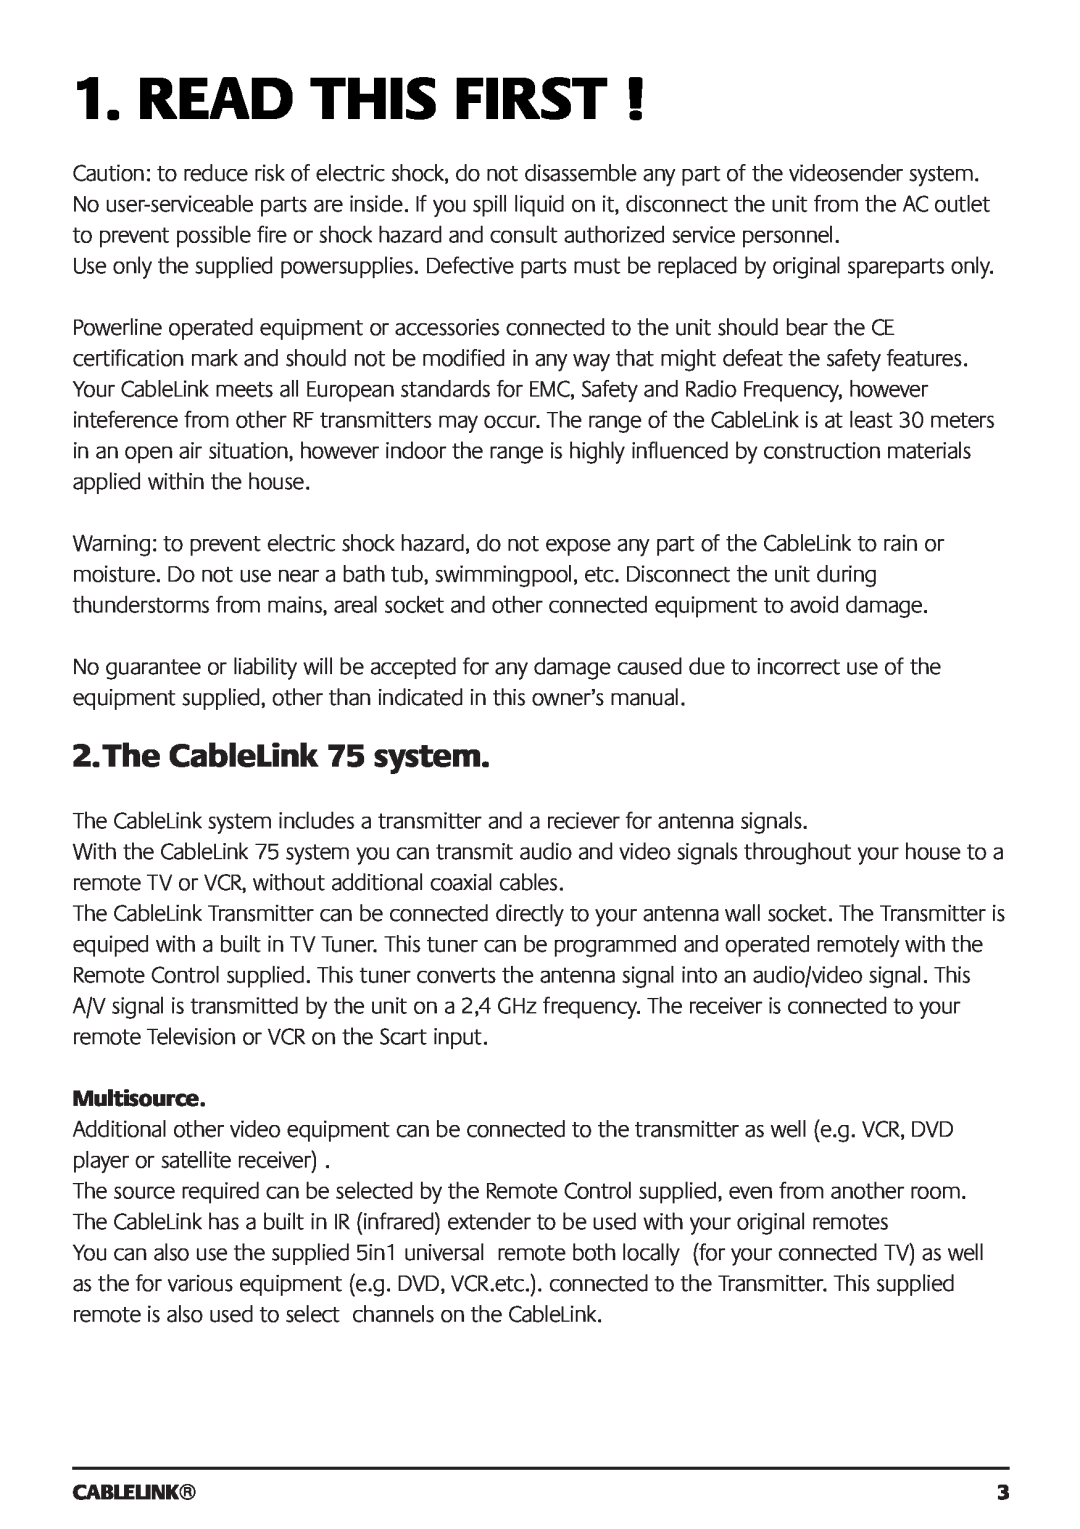 Marmitek 121101 owner manual Read This First, The CableLink 75 system, Multisource 